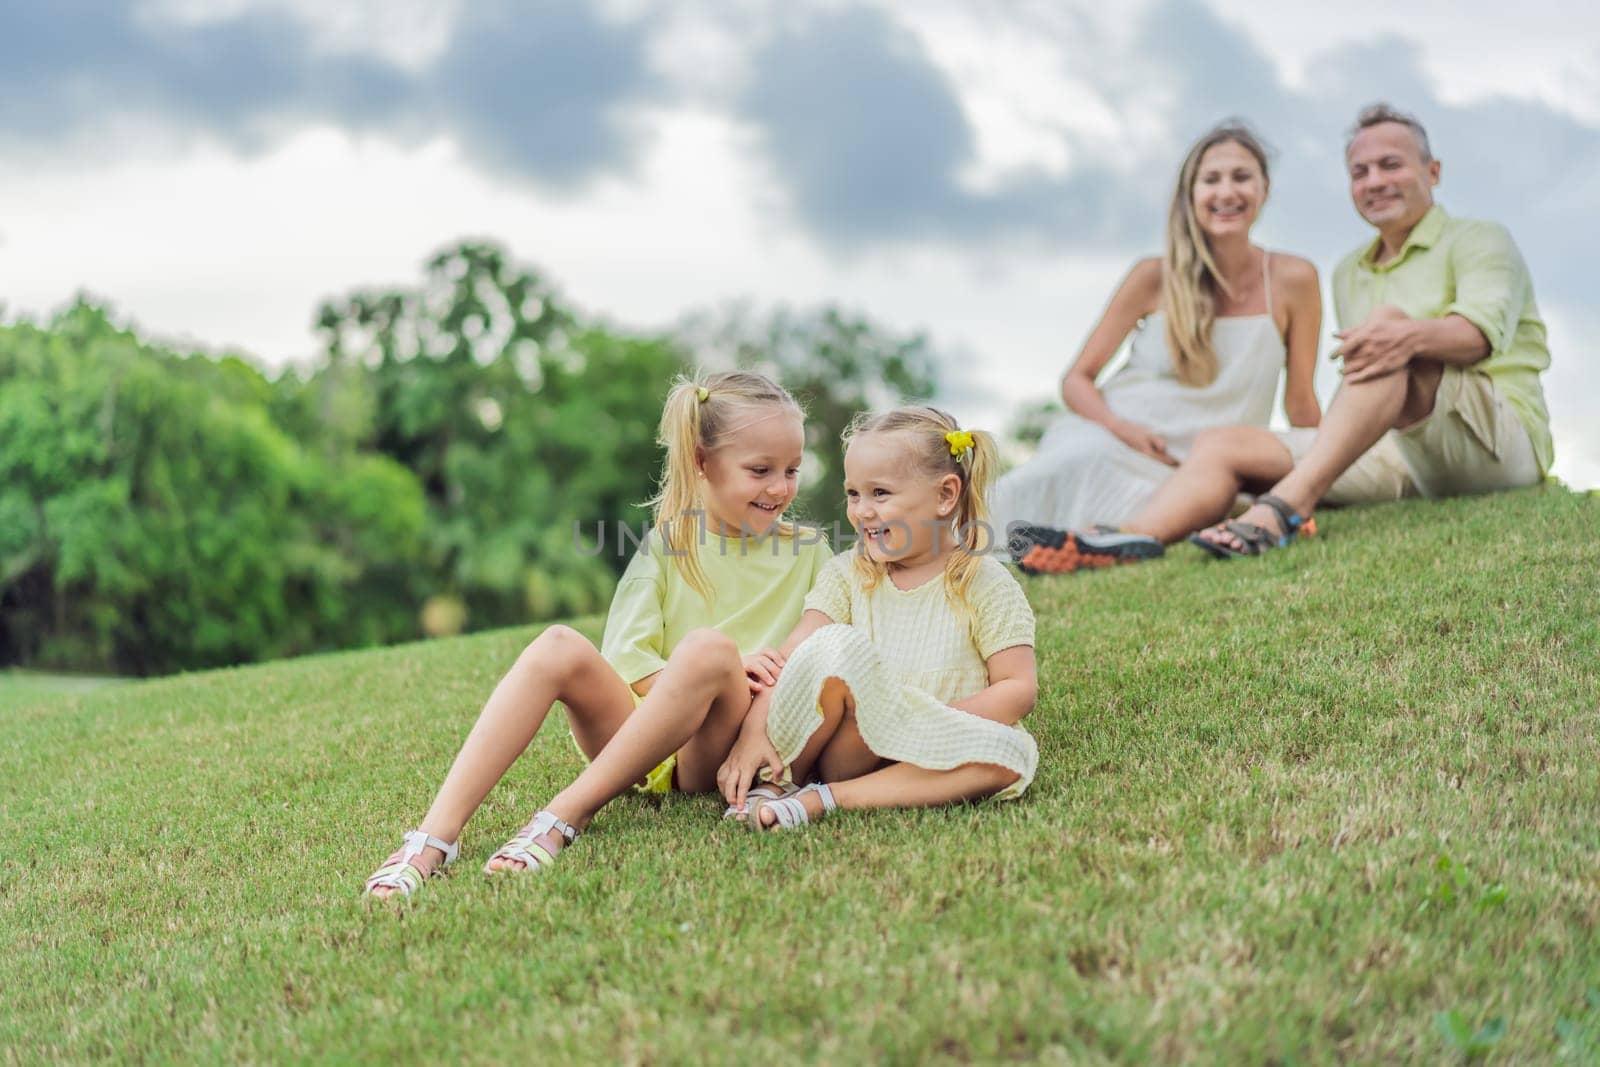 A happy family, two girls, dad, and a pregnant mom, enjoys quality time together on a lush green lawn, creating cherished memories of togetherness.